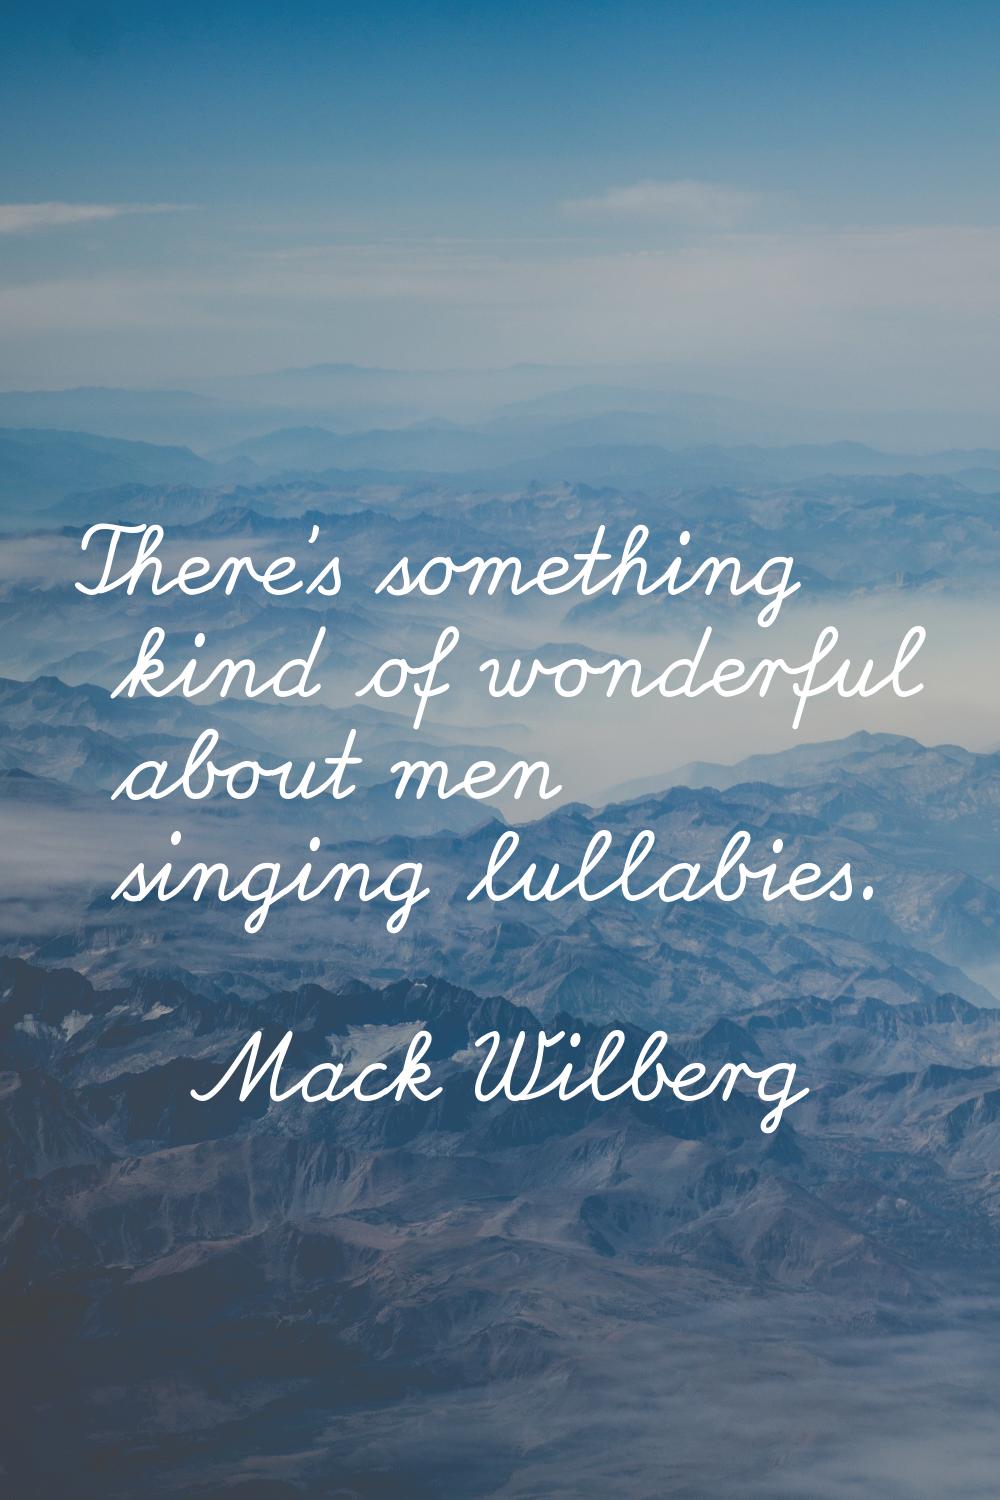 There's something kind of wonderful about men singing lullabies.